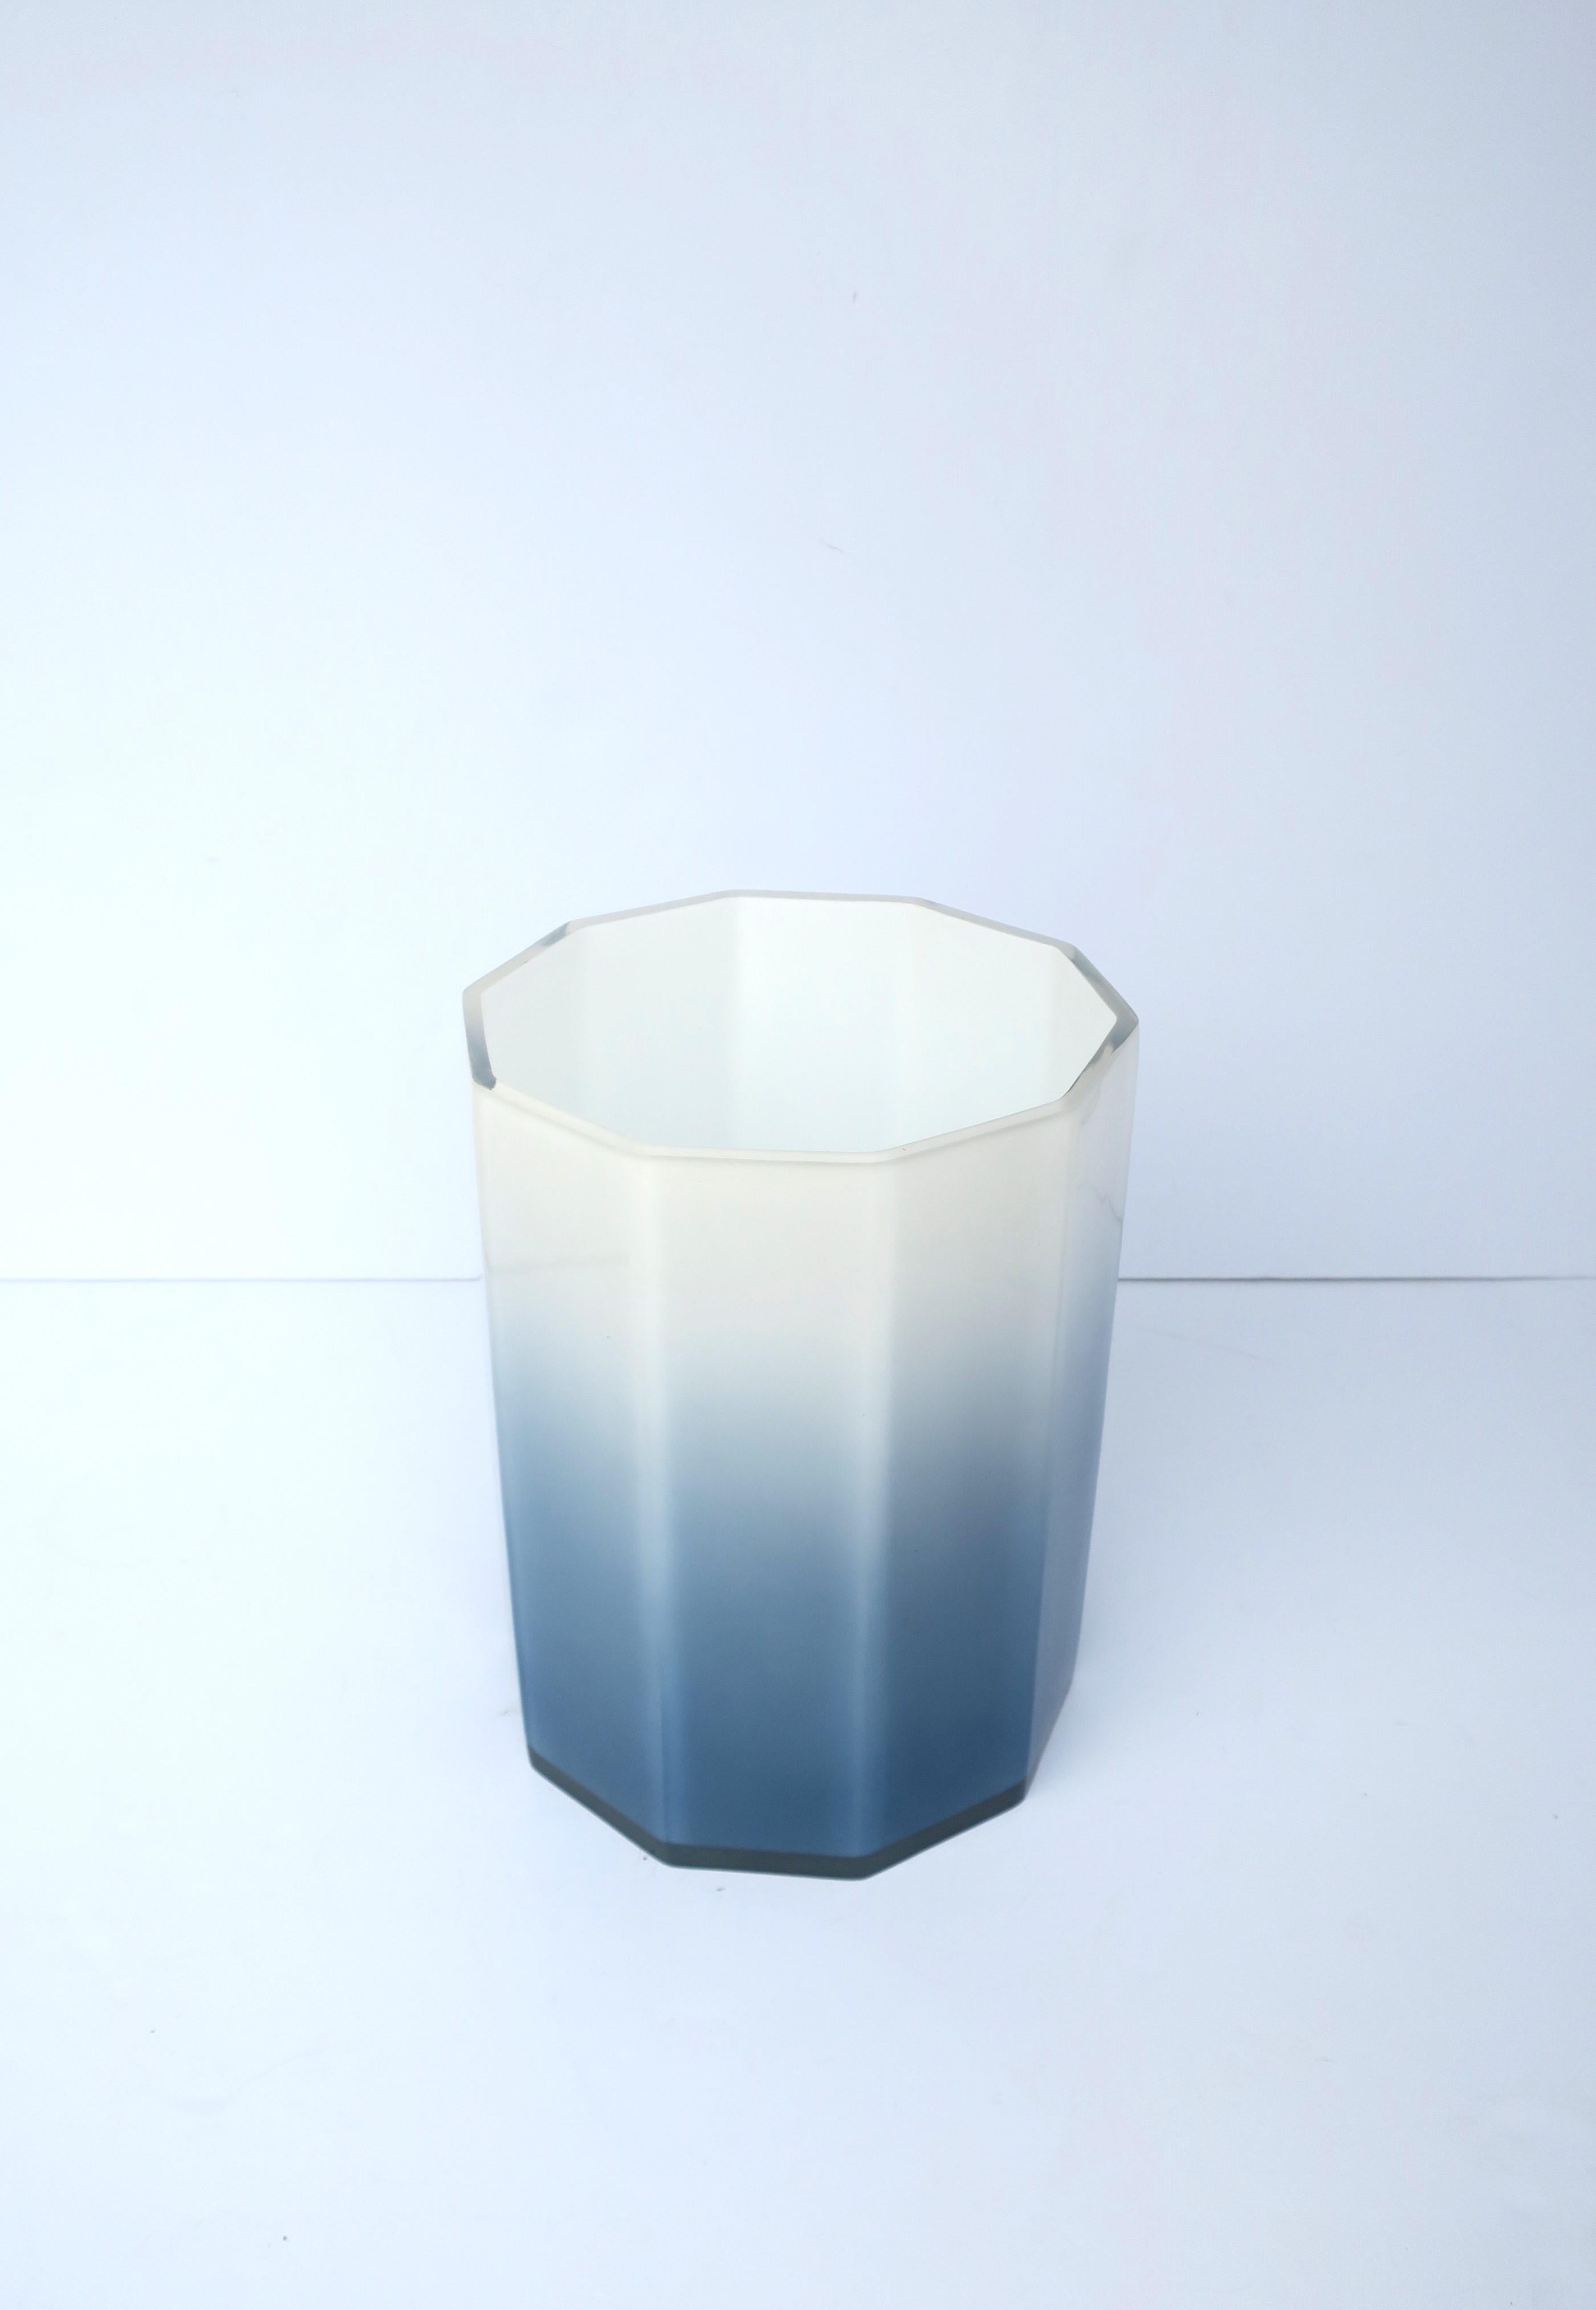 A blue and white ombre acrylic wastebasket or trash can with a decagon shape, modern style, circa 21st century. A great piece for a bathroom, powder room, office, walk-in closet, pool house, etc. Dimensions: 7.57